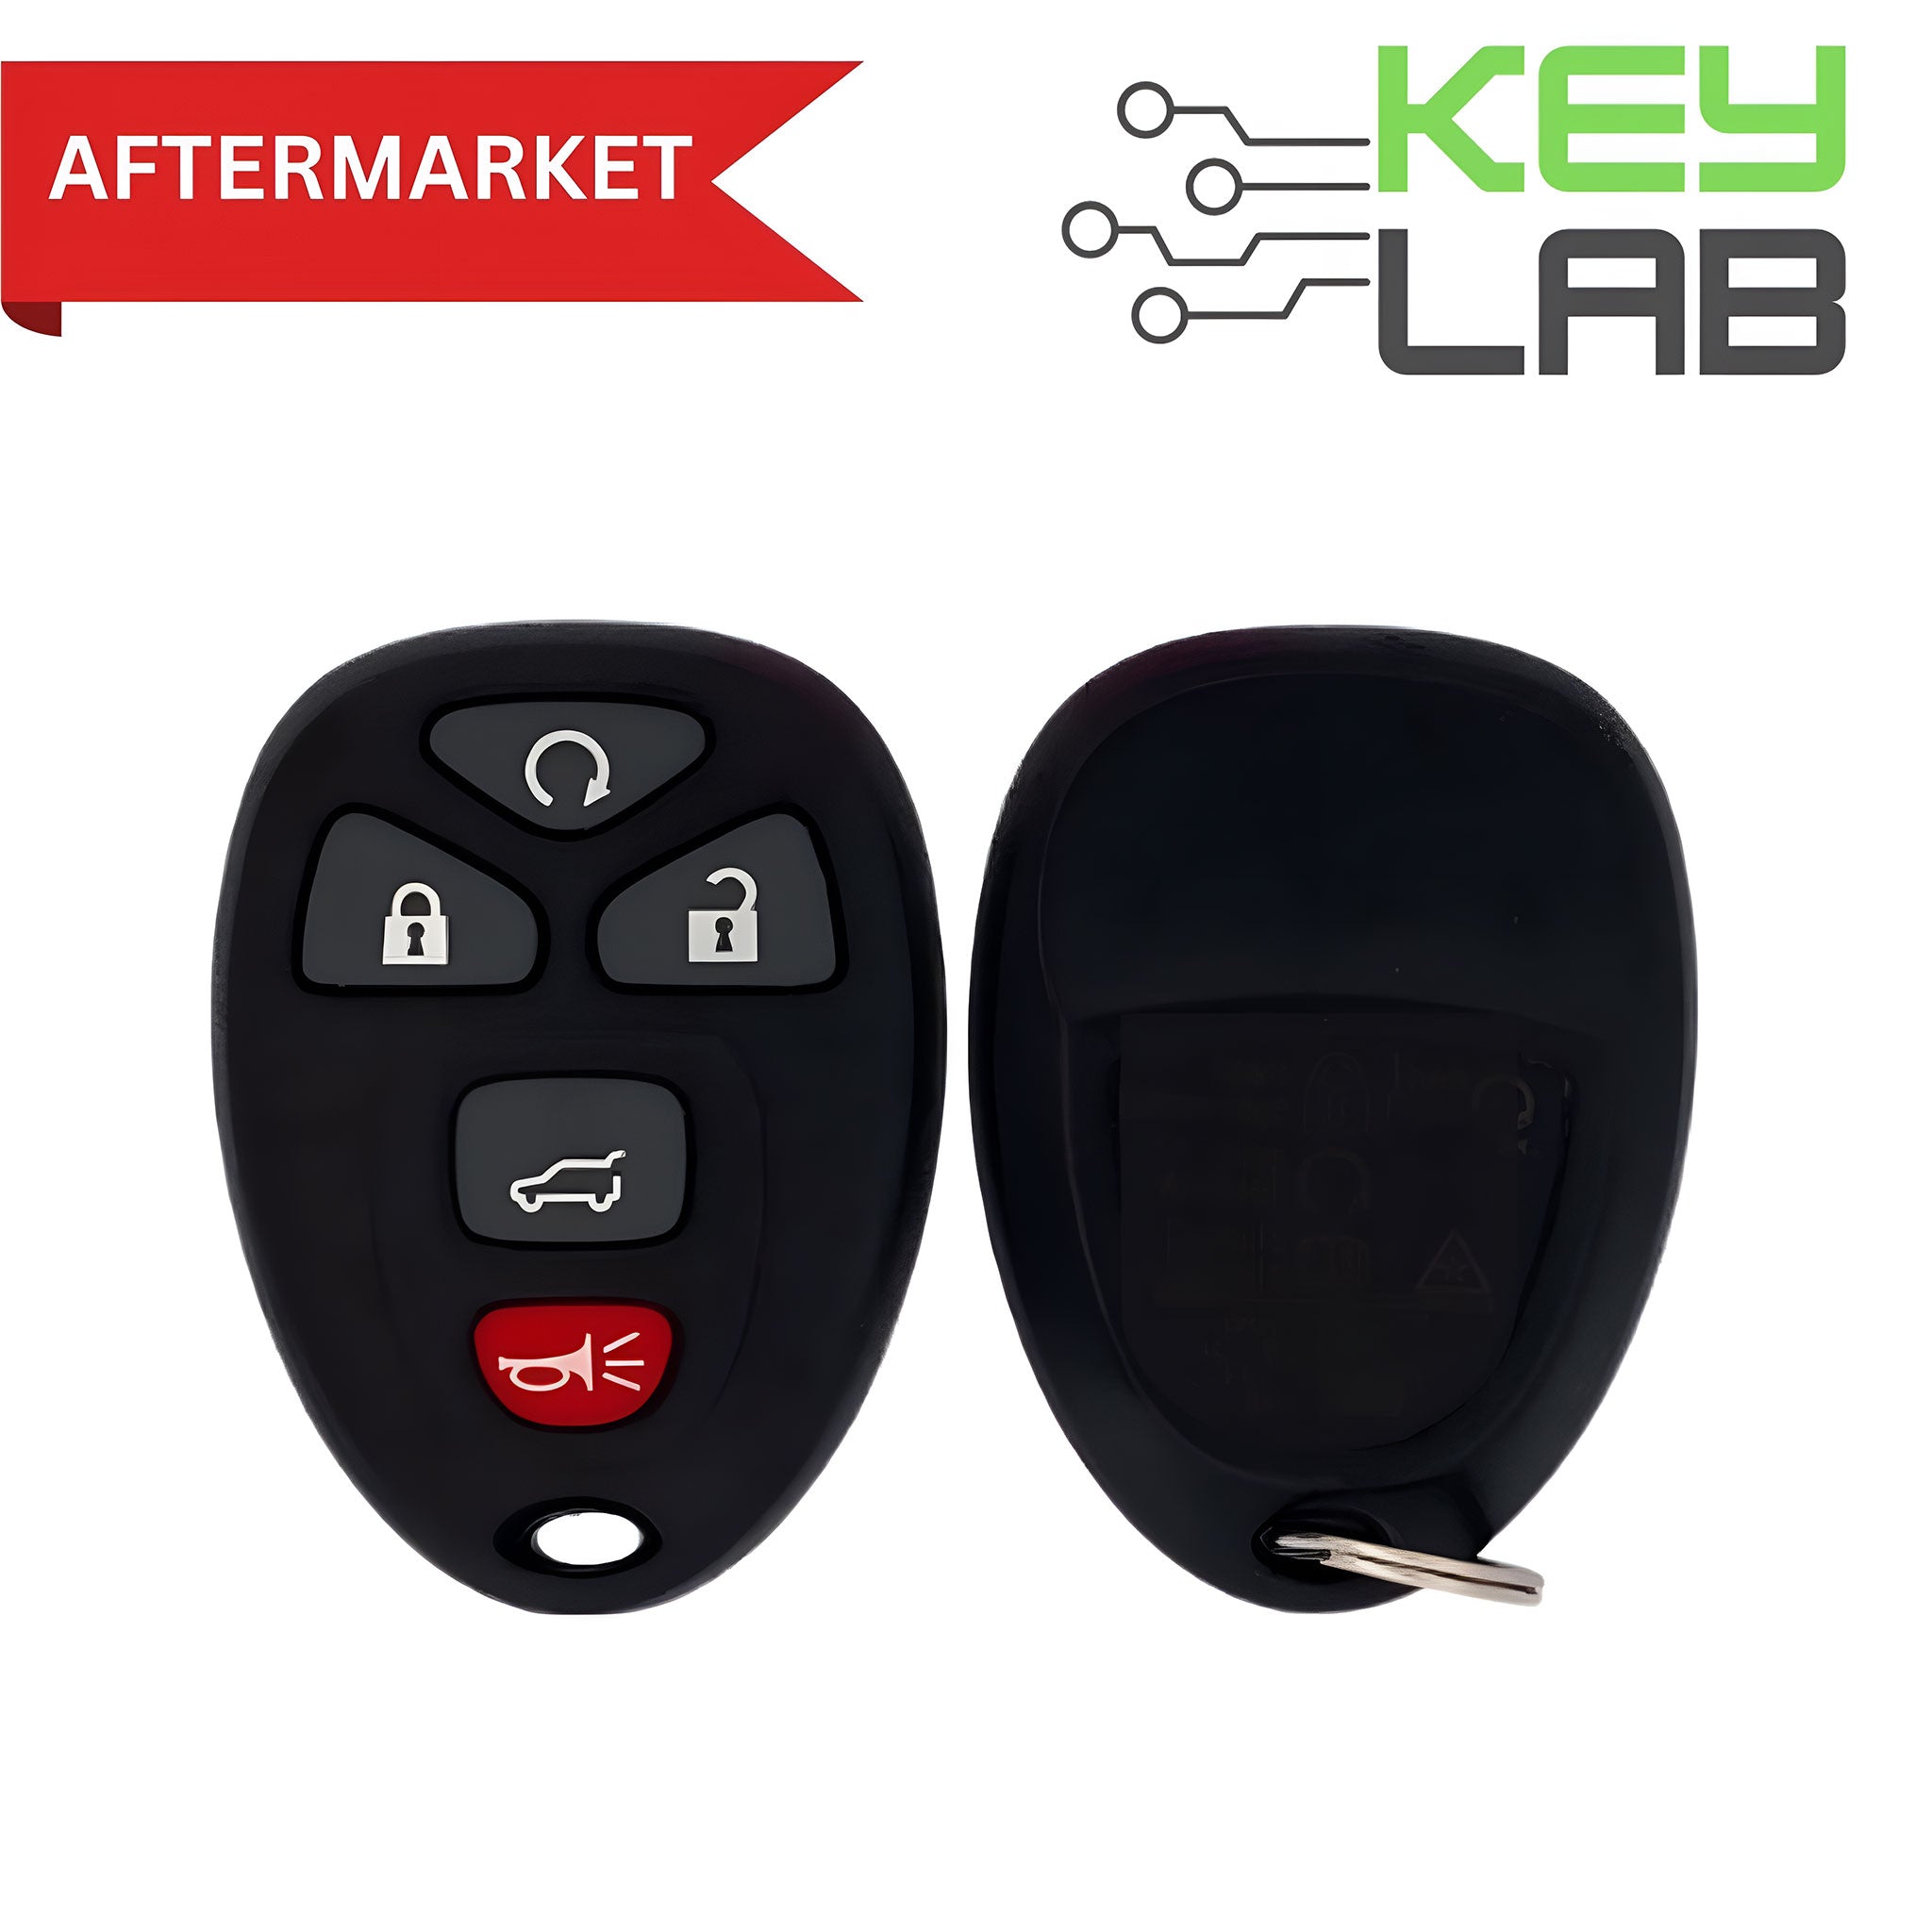 GM Aftermarket 2007-2017 Keyless Entry Remote 5B Hatch/Remote Start FCCID:  OUC60270, OUC60221, M3N5WY8109 PN# 20869057